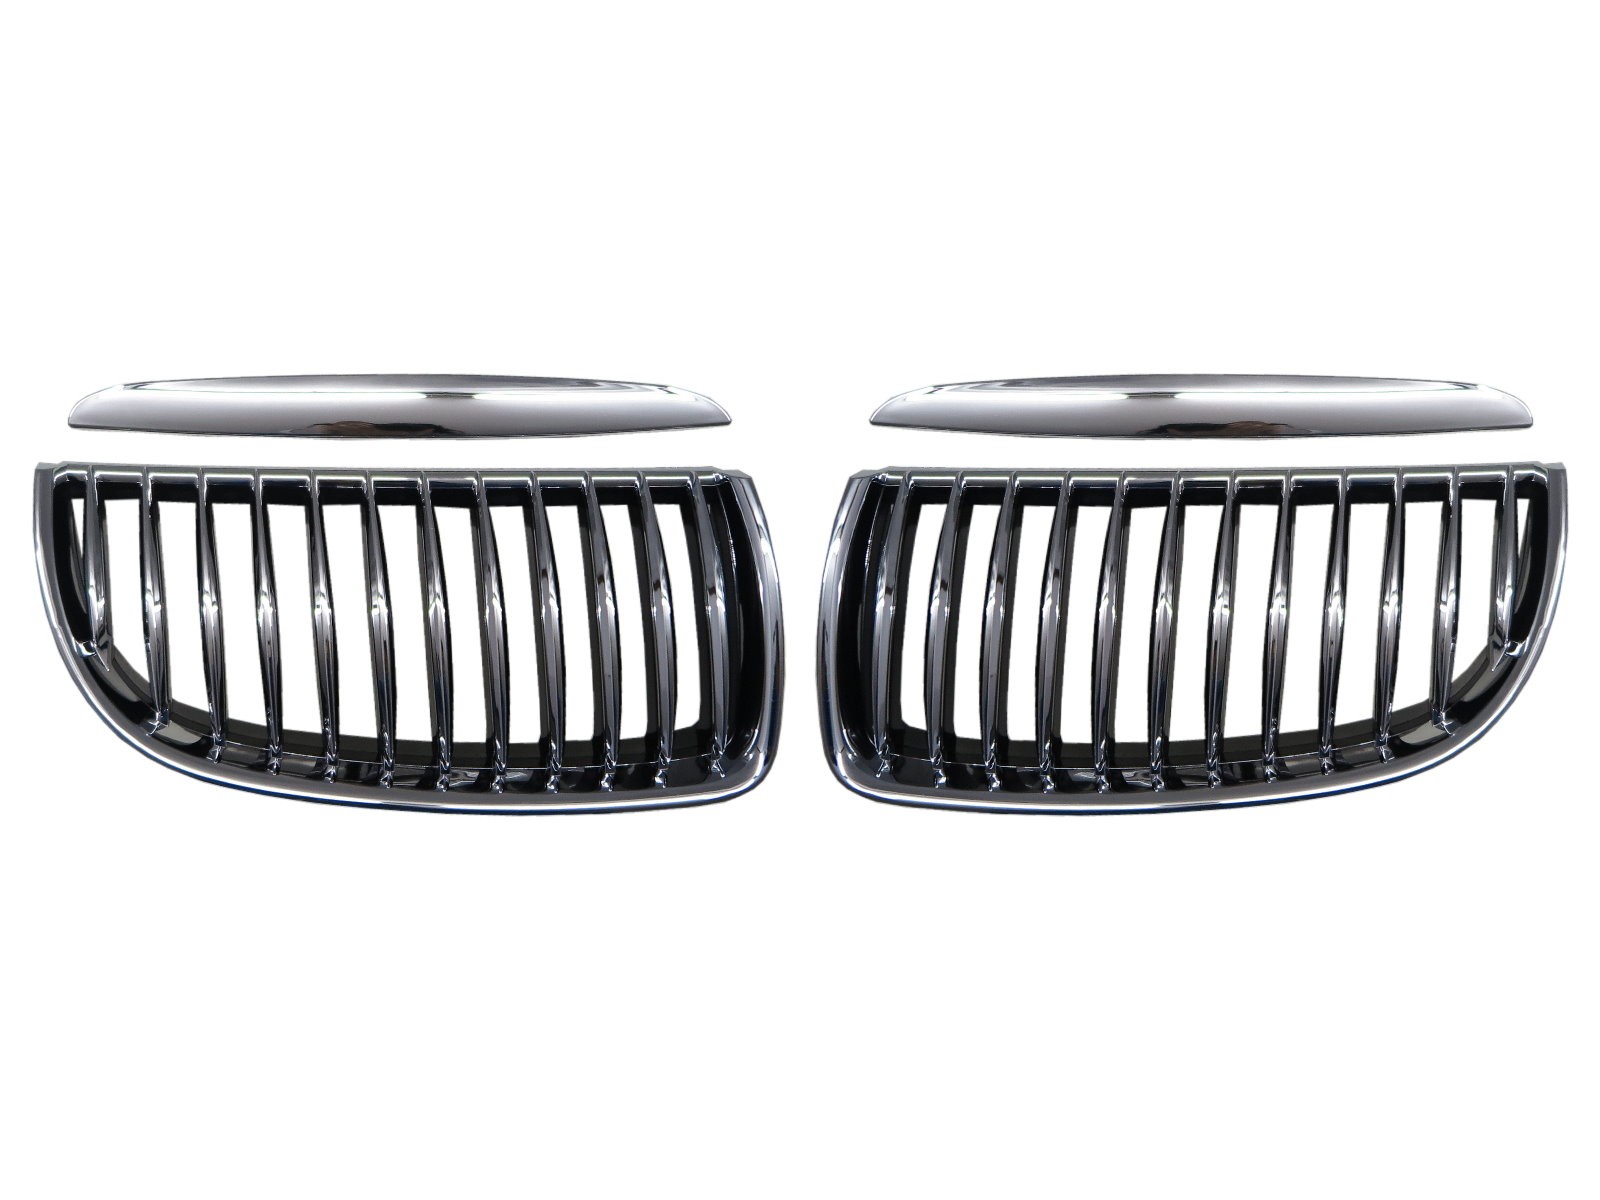 CrazyTheGod 3-Series E90/E91 Fifth generation 2005-2008 Sedan/Wagon 4D/5D GRILLE/GRILL Chrome for BMW